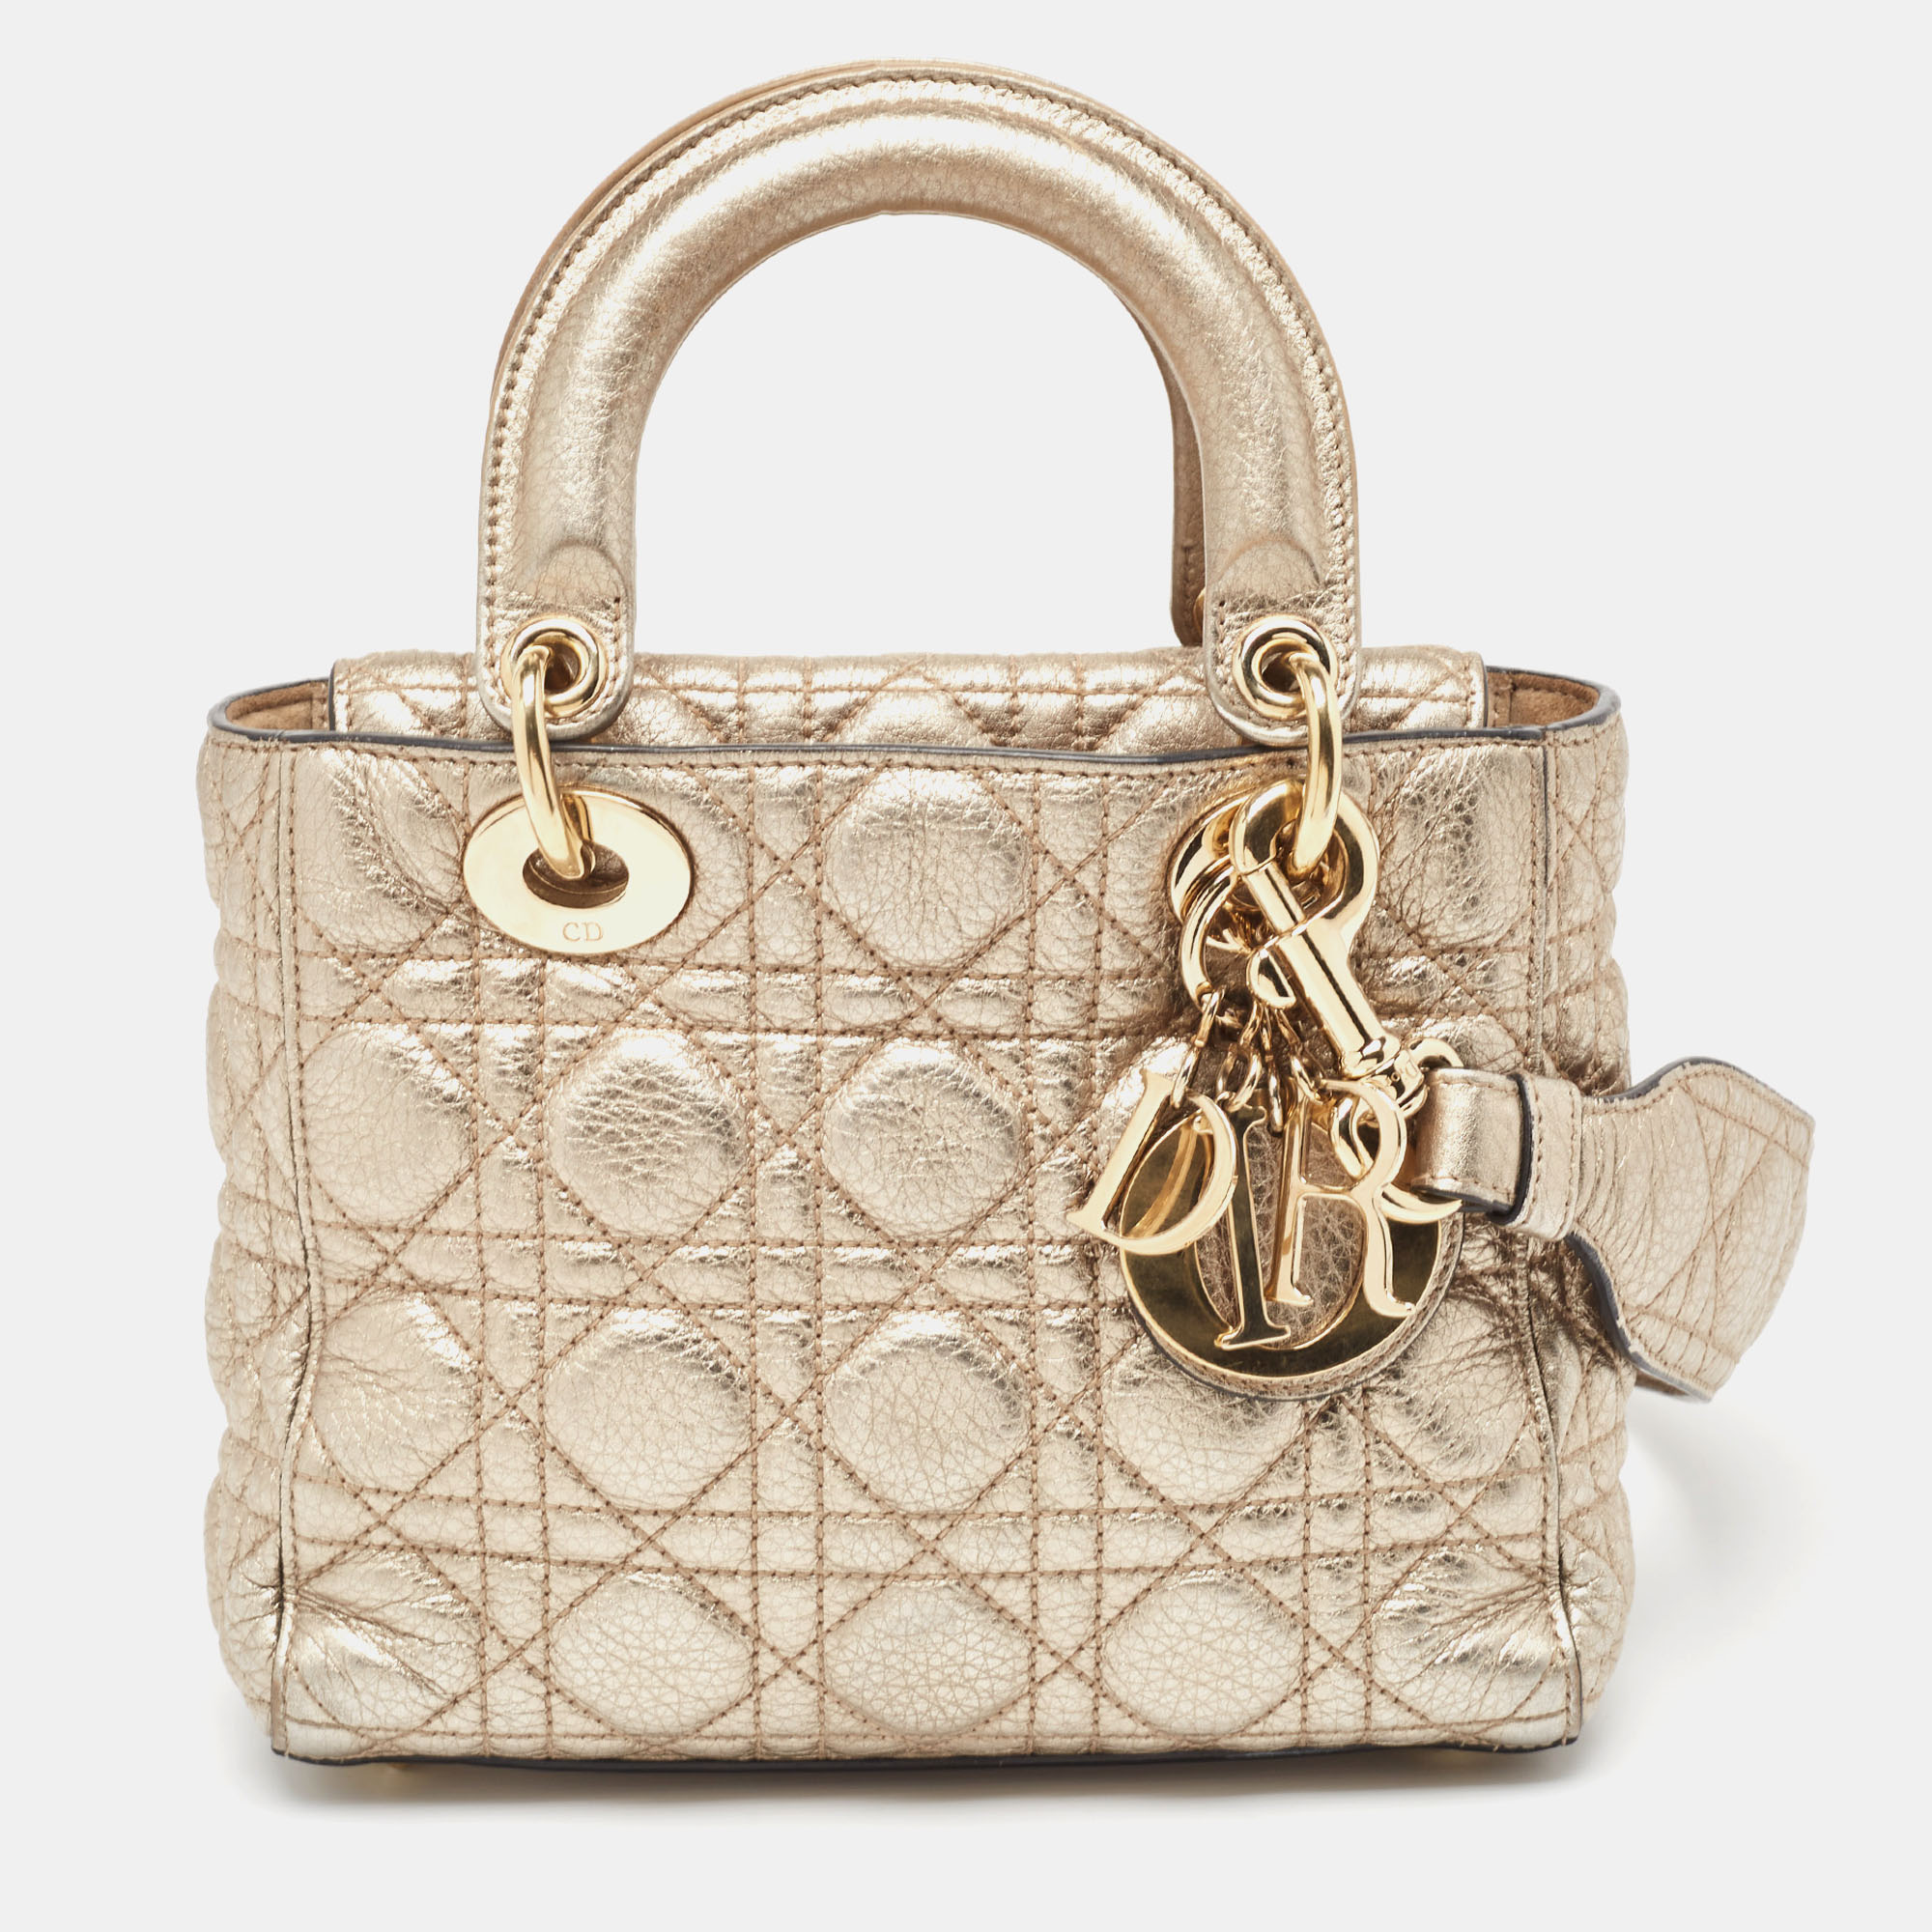 A timeless status and great design mark the Lady Dior tote. It is an iconic bag that people continue to invest in to this day. We have here this Lady Dior in gold with the iconic Cannage motif two handles and a shoulder strap.